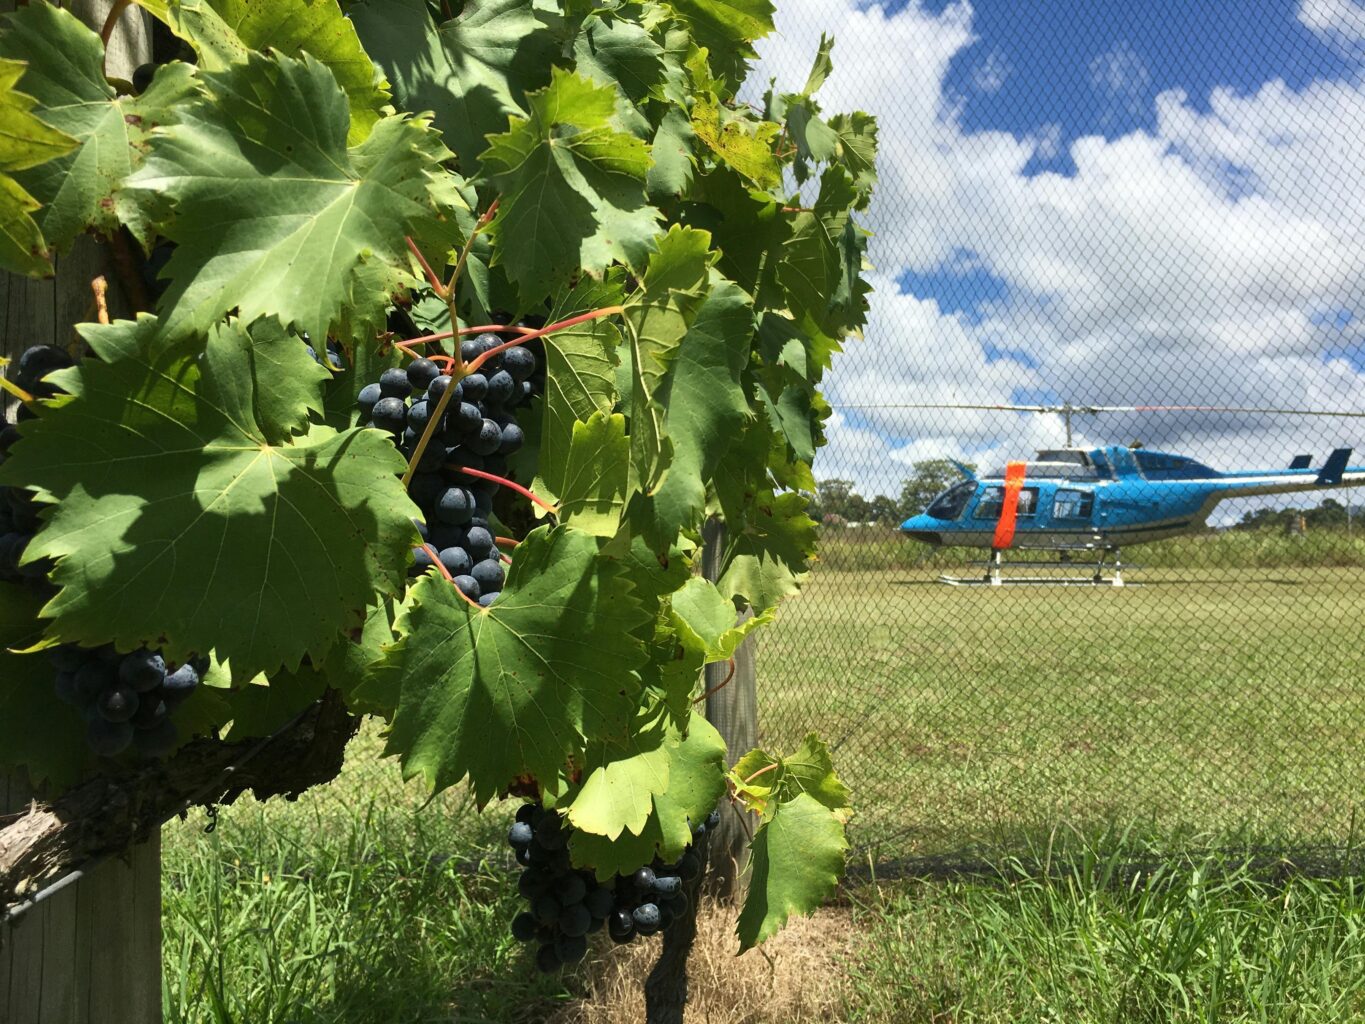 Helicopter on the ground in a vineyard. Clear blue sky, green grass and vines